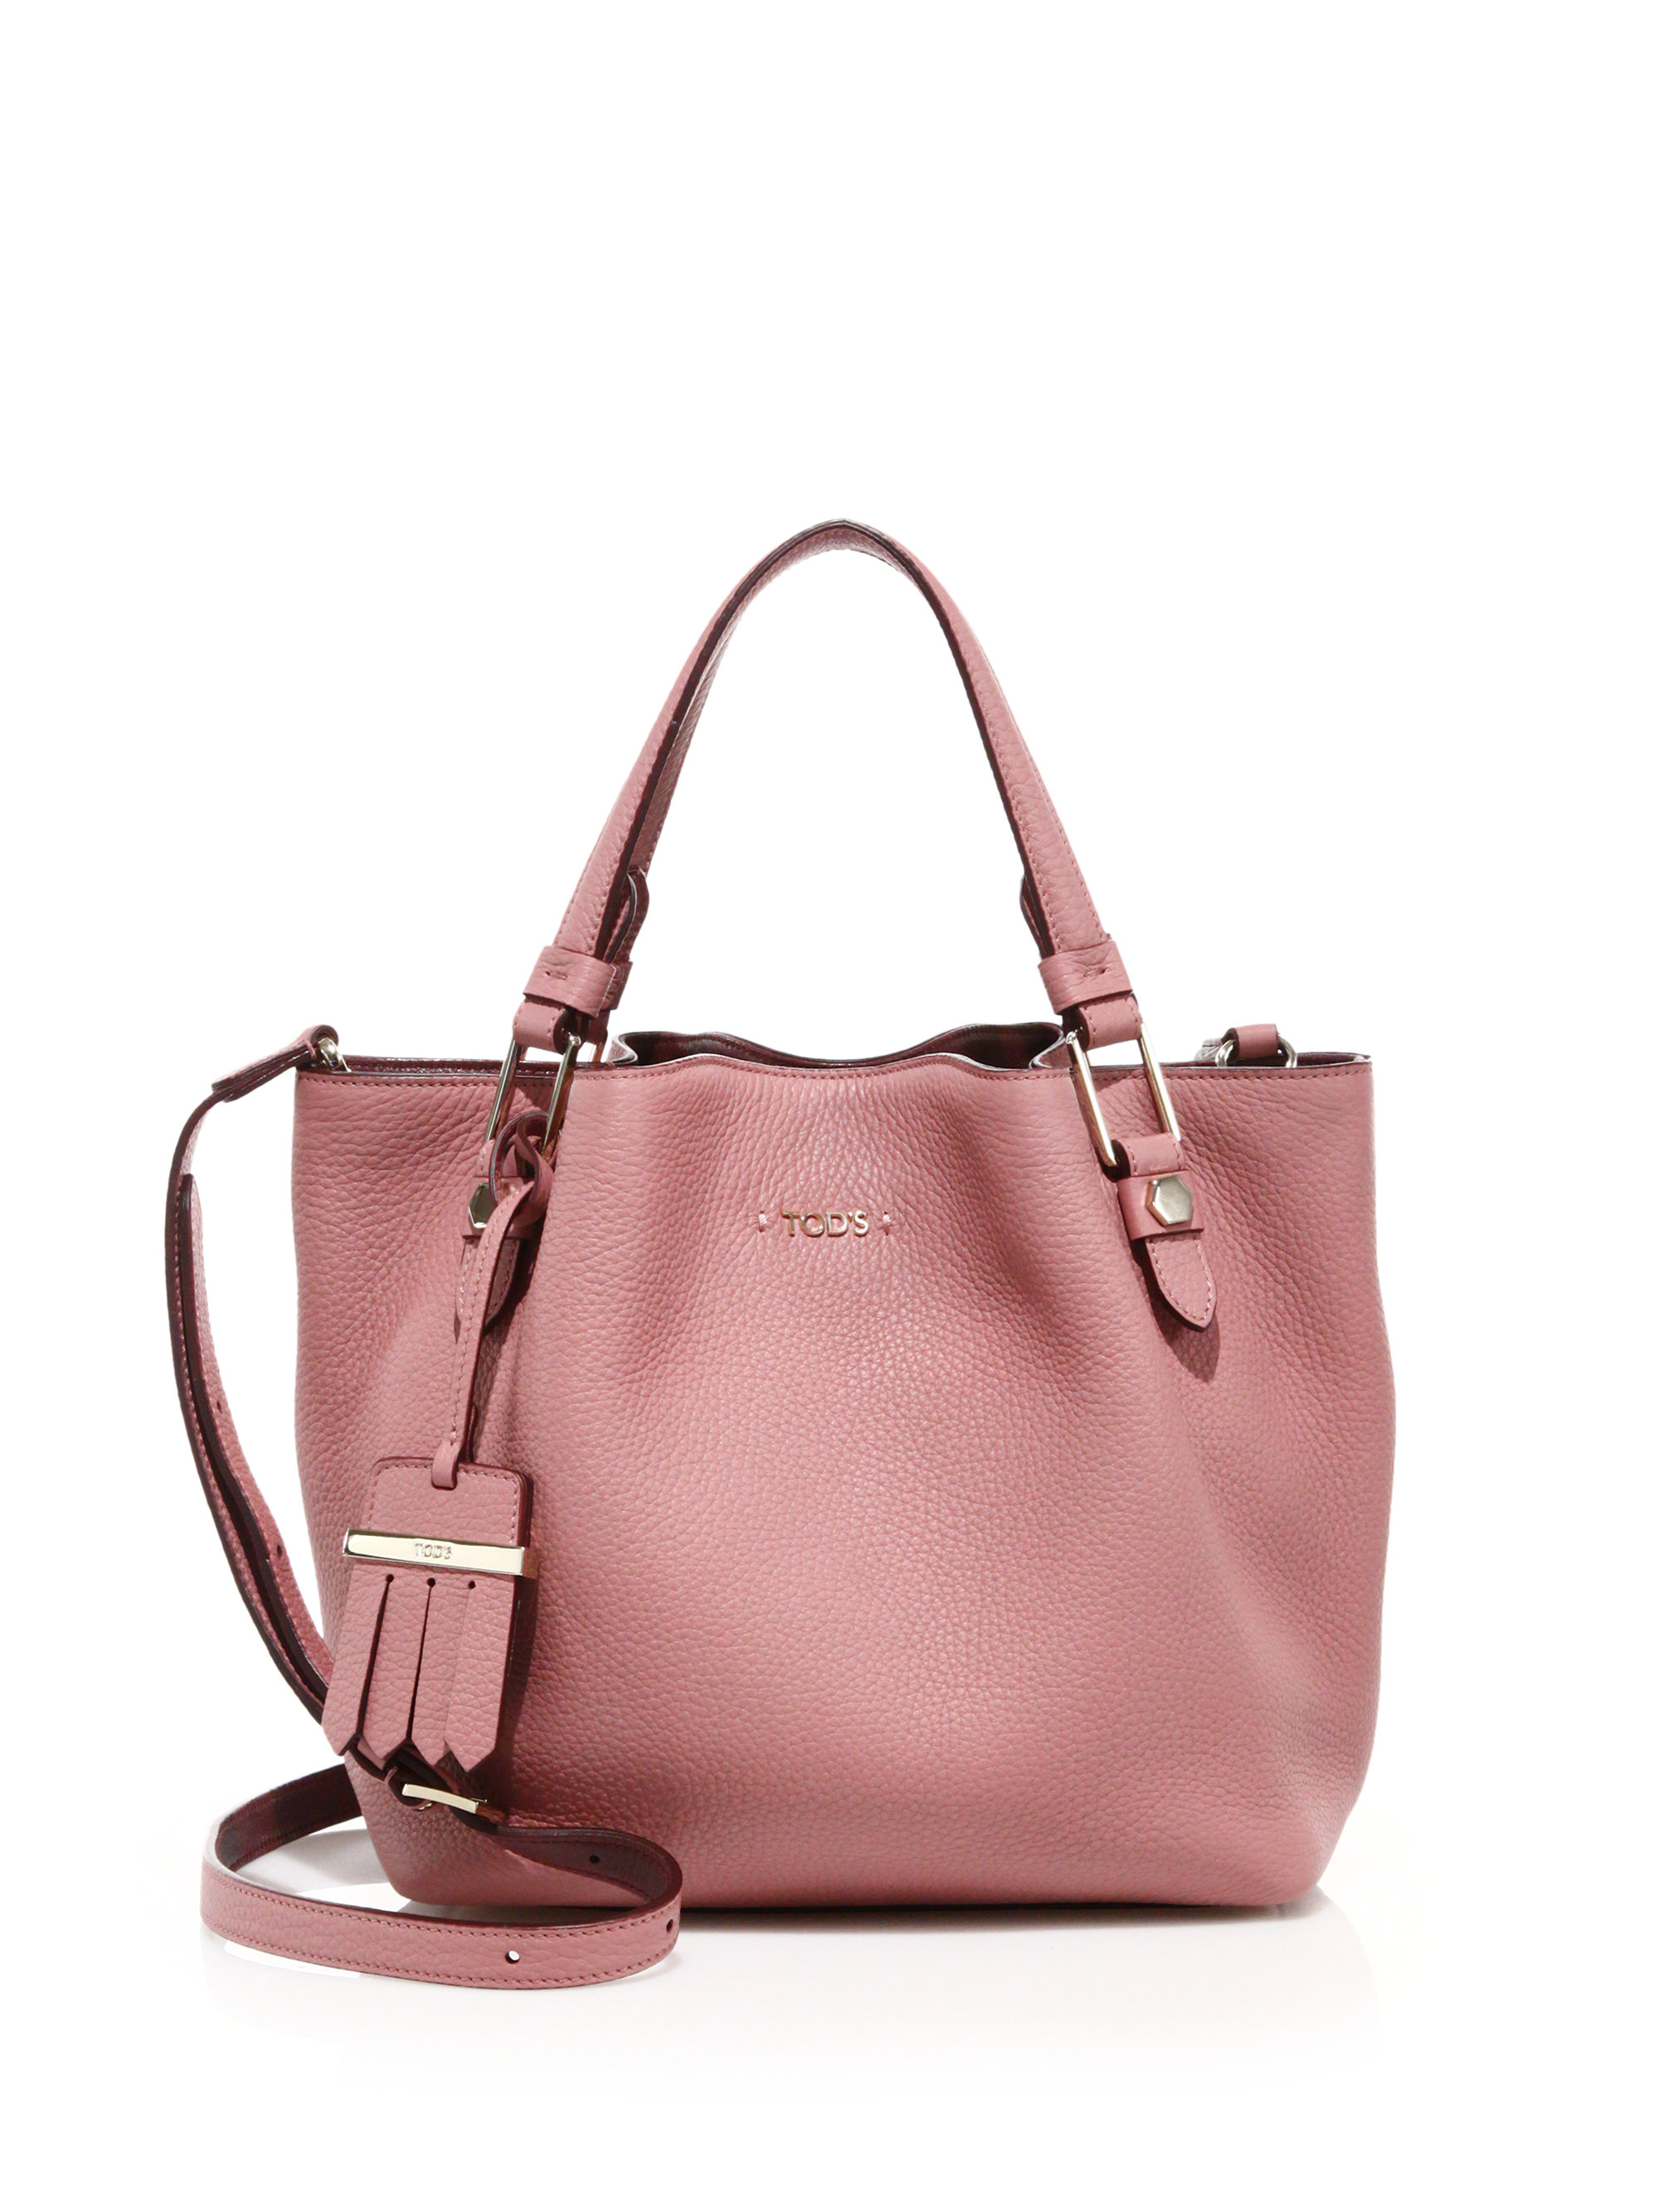 Lyst - Tod's Flower Mini Tote in Pink